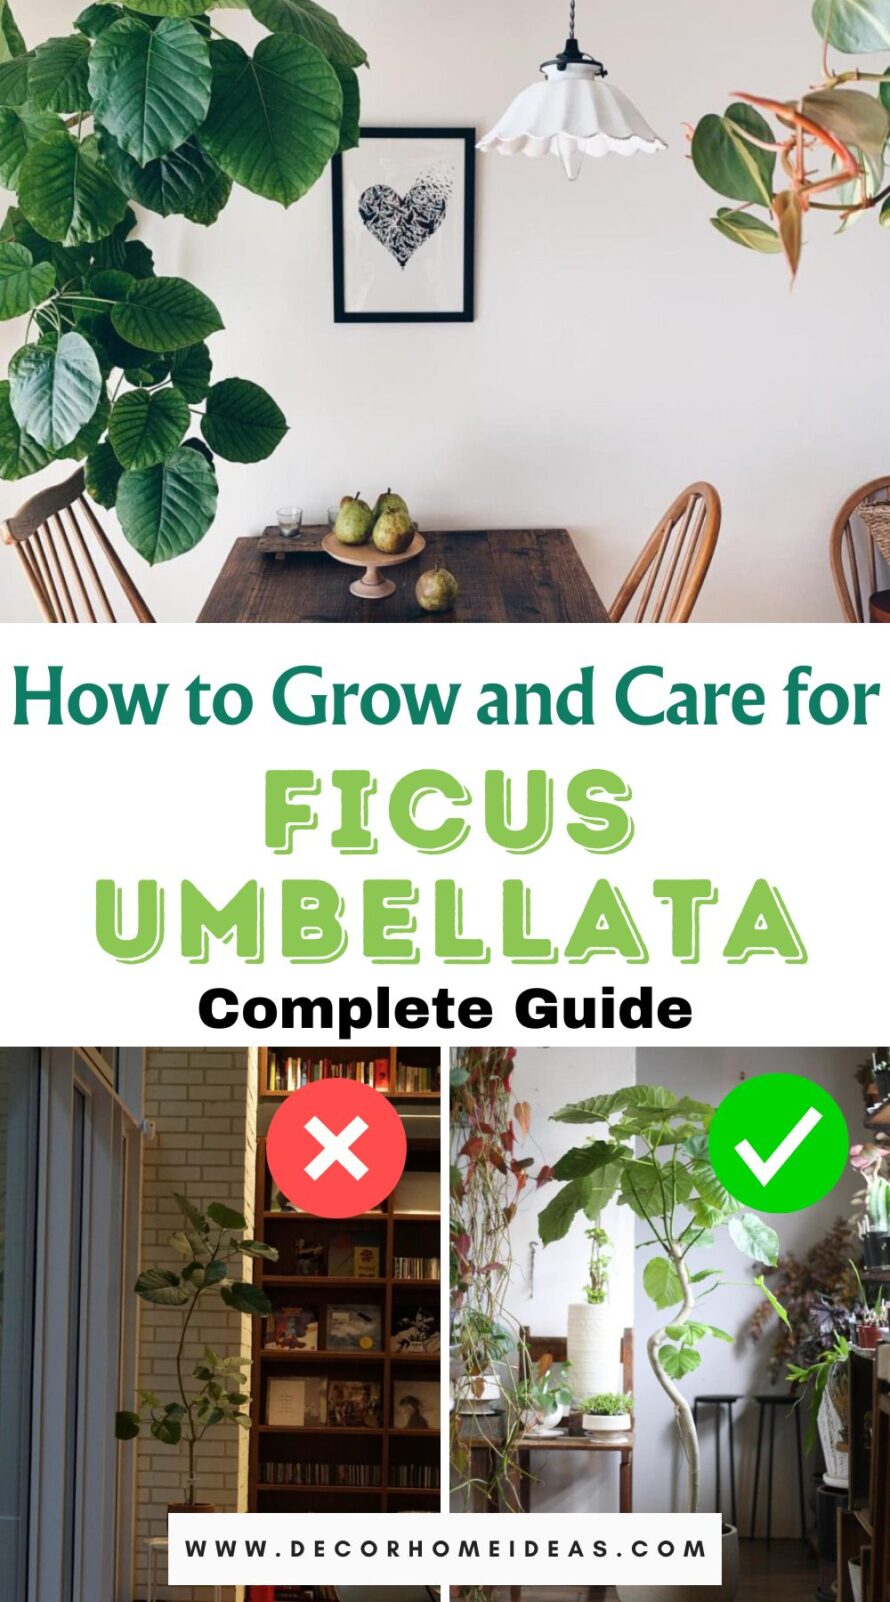 Discover essential tips for growing and caring for Ficus umbellata, also known as the Cluster Fig tree. From lighting and watering to pest management, learn how to keep your indoor tropical plant thriving.